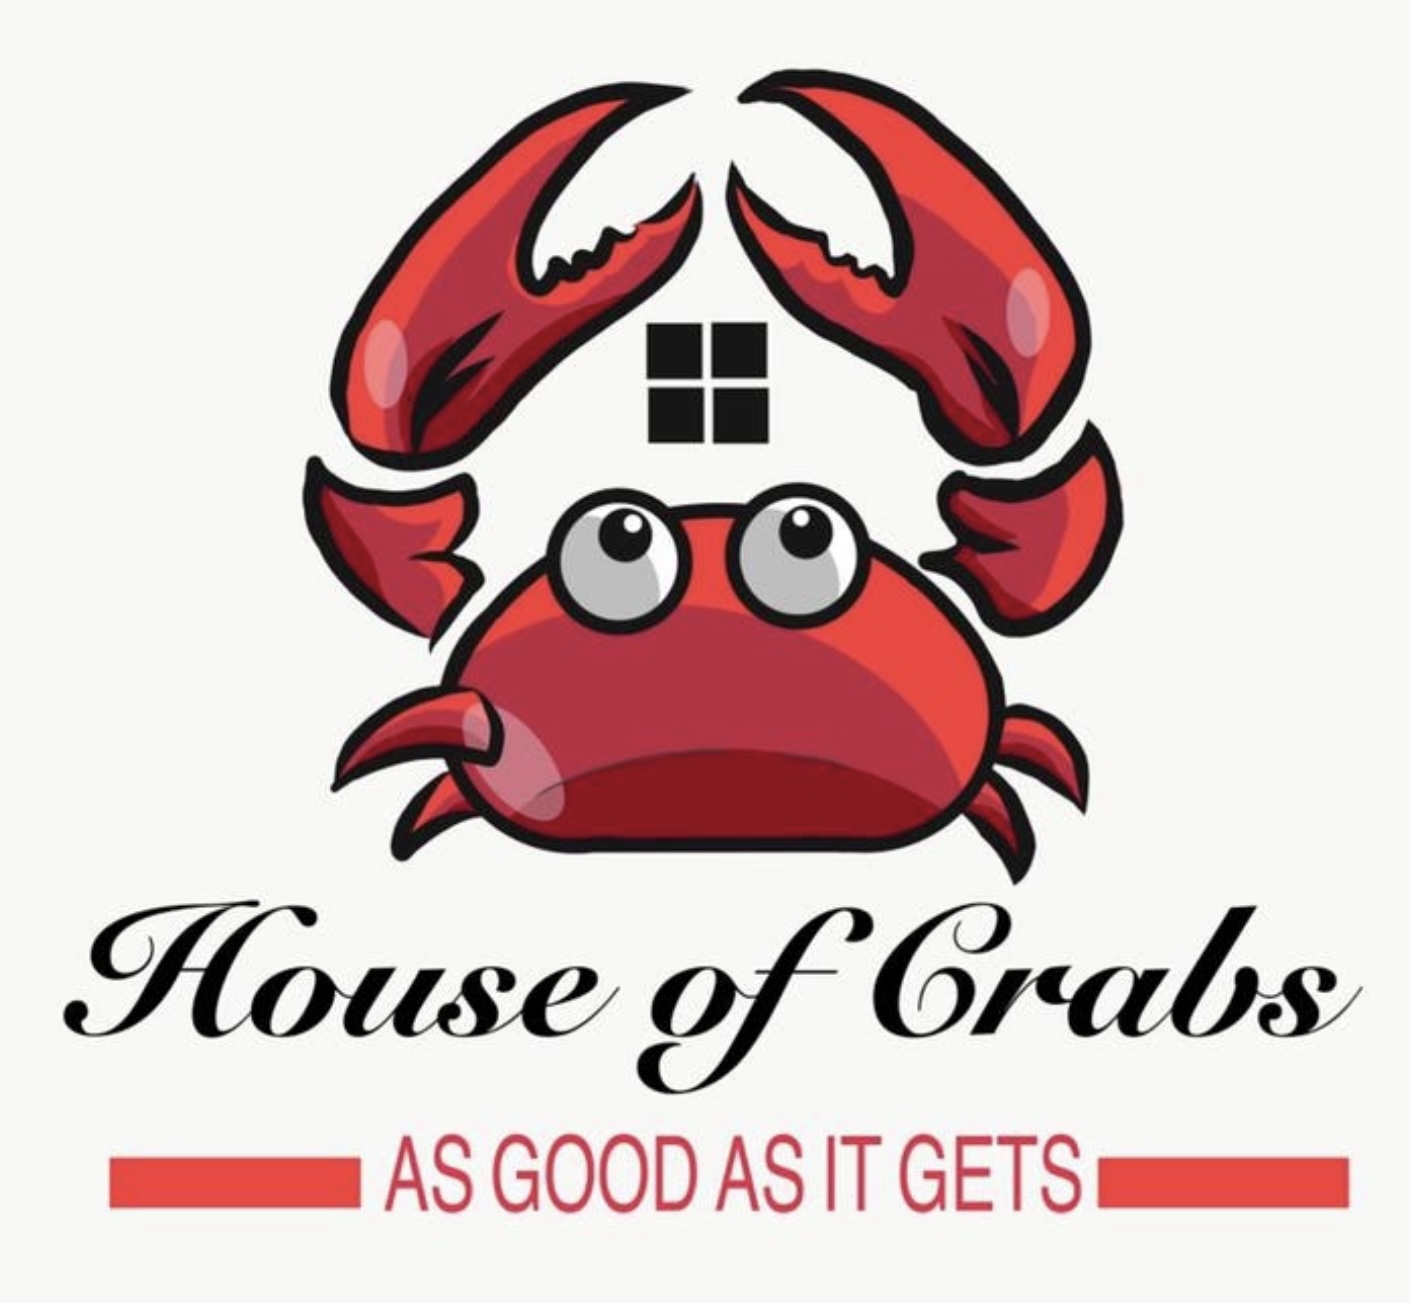 https://my.mncjobz.com/company/house-of-crabs